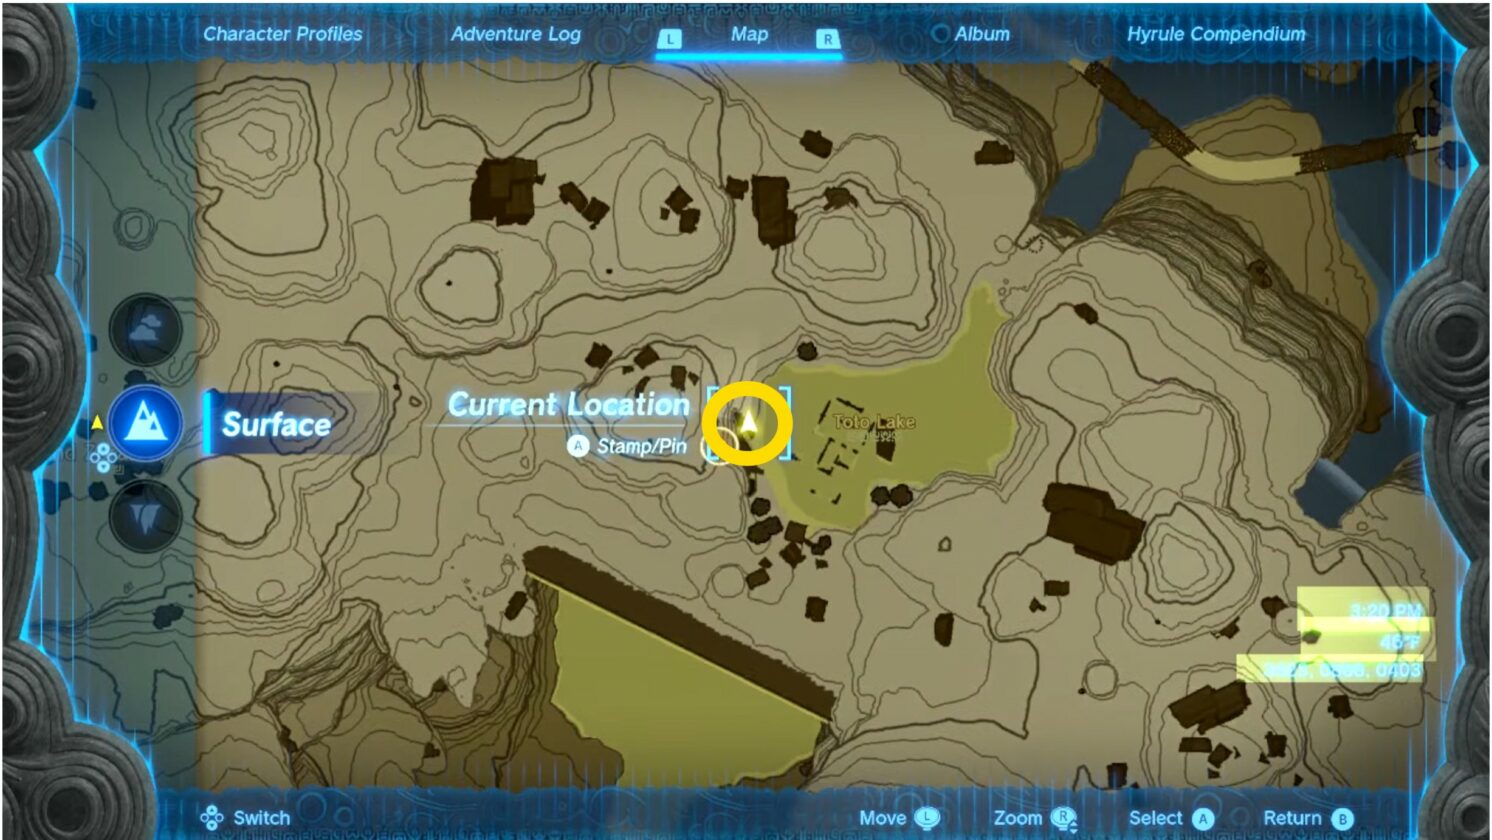 The Broken Slate quest location in Tears of the Kingdom